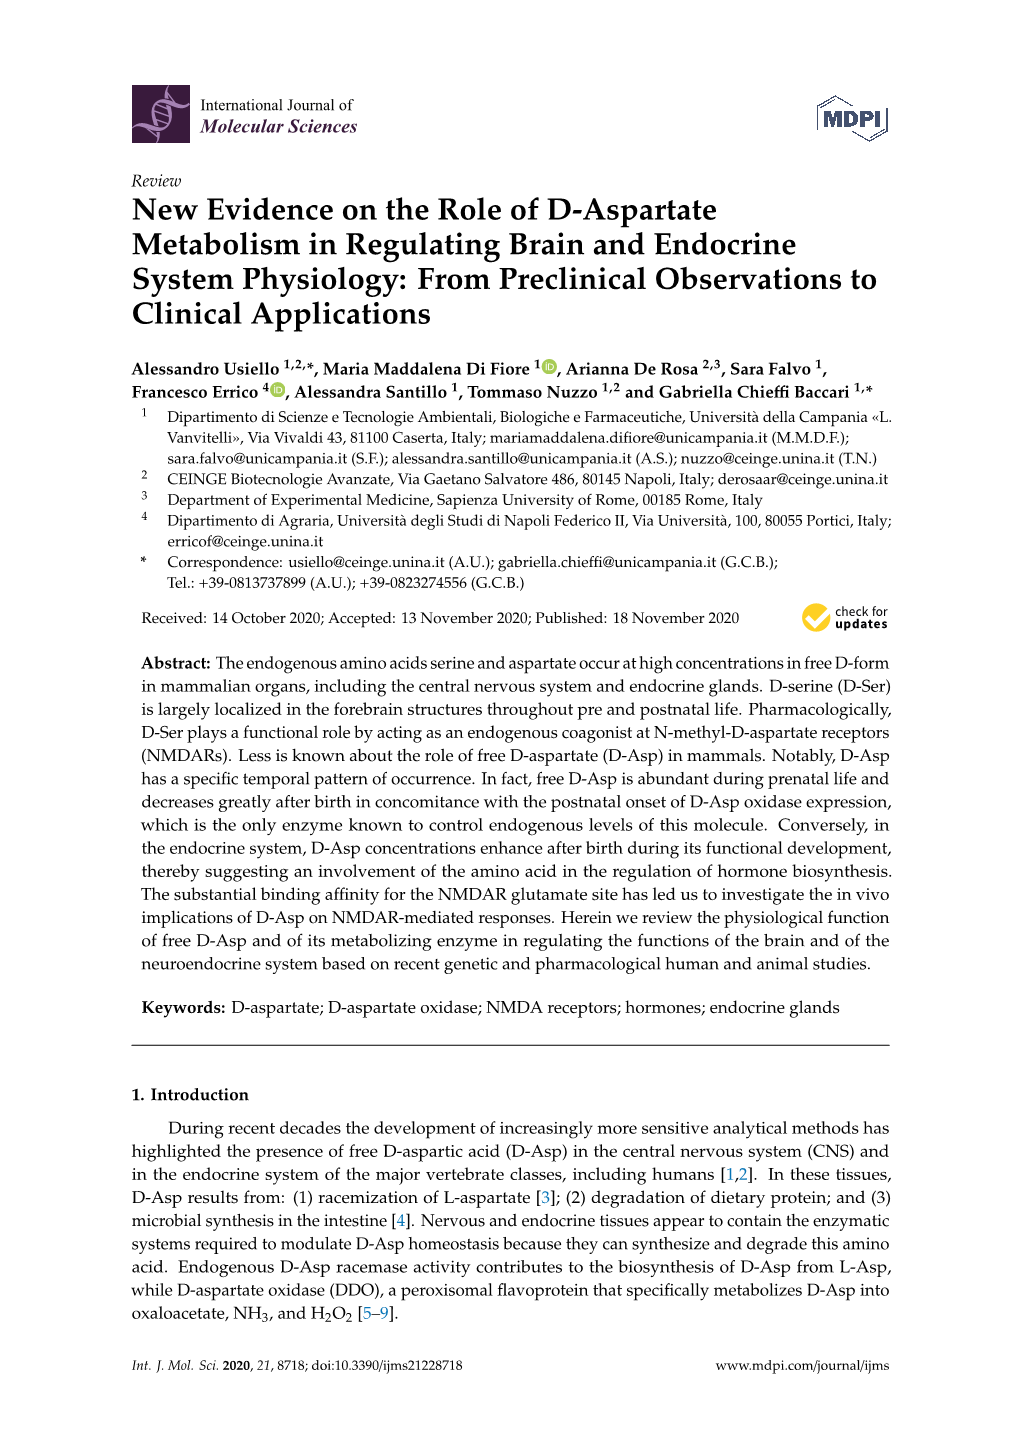 New Evidence on the Role of D-Aspartate Metabolism in Regulating Brain and Endocrine System Physiology: from Preclinical Observations to Clinical Applications